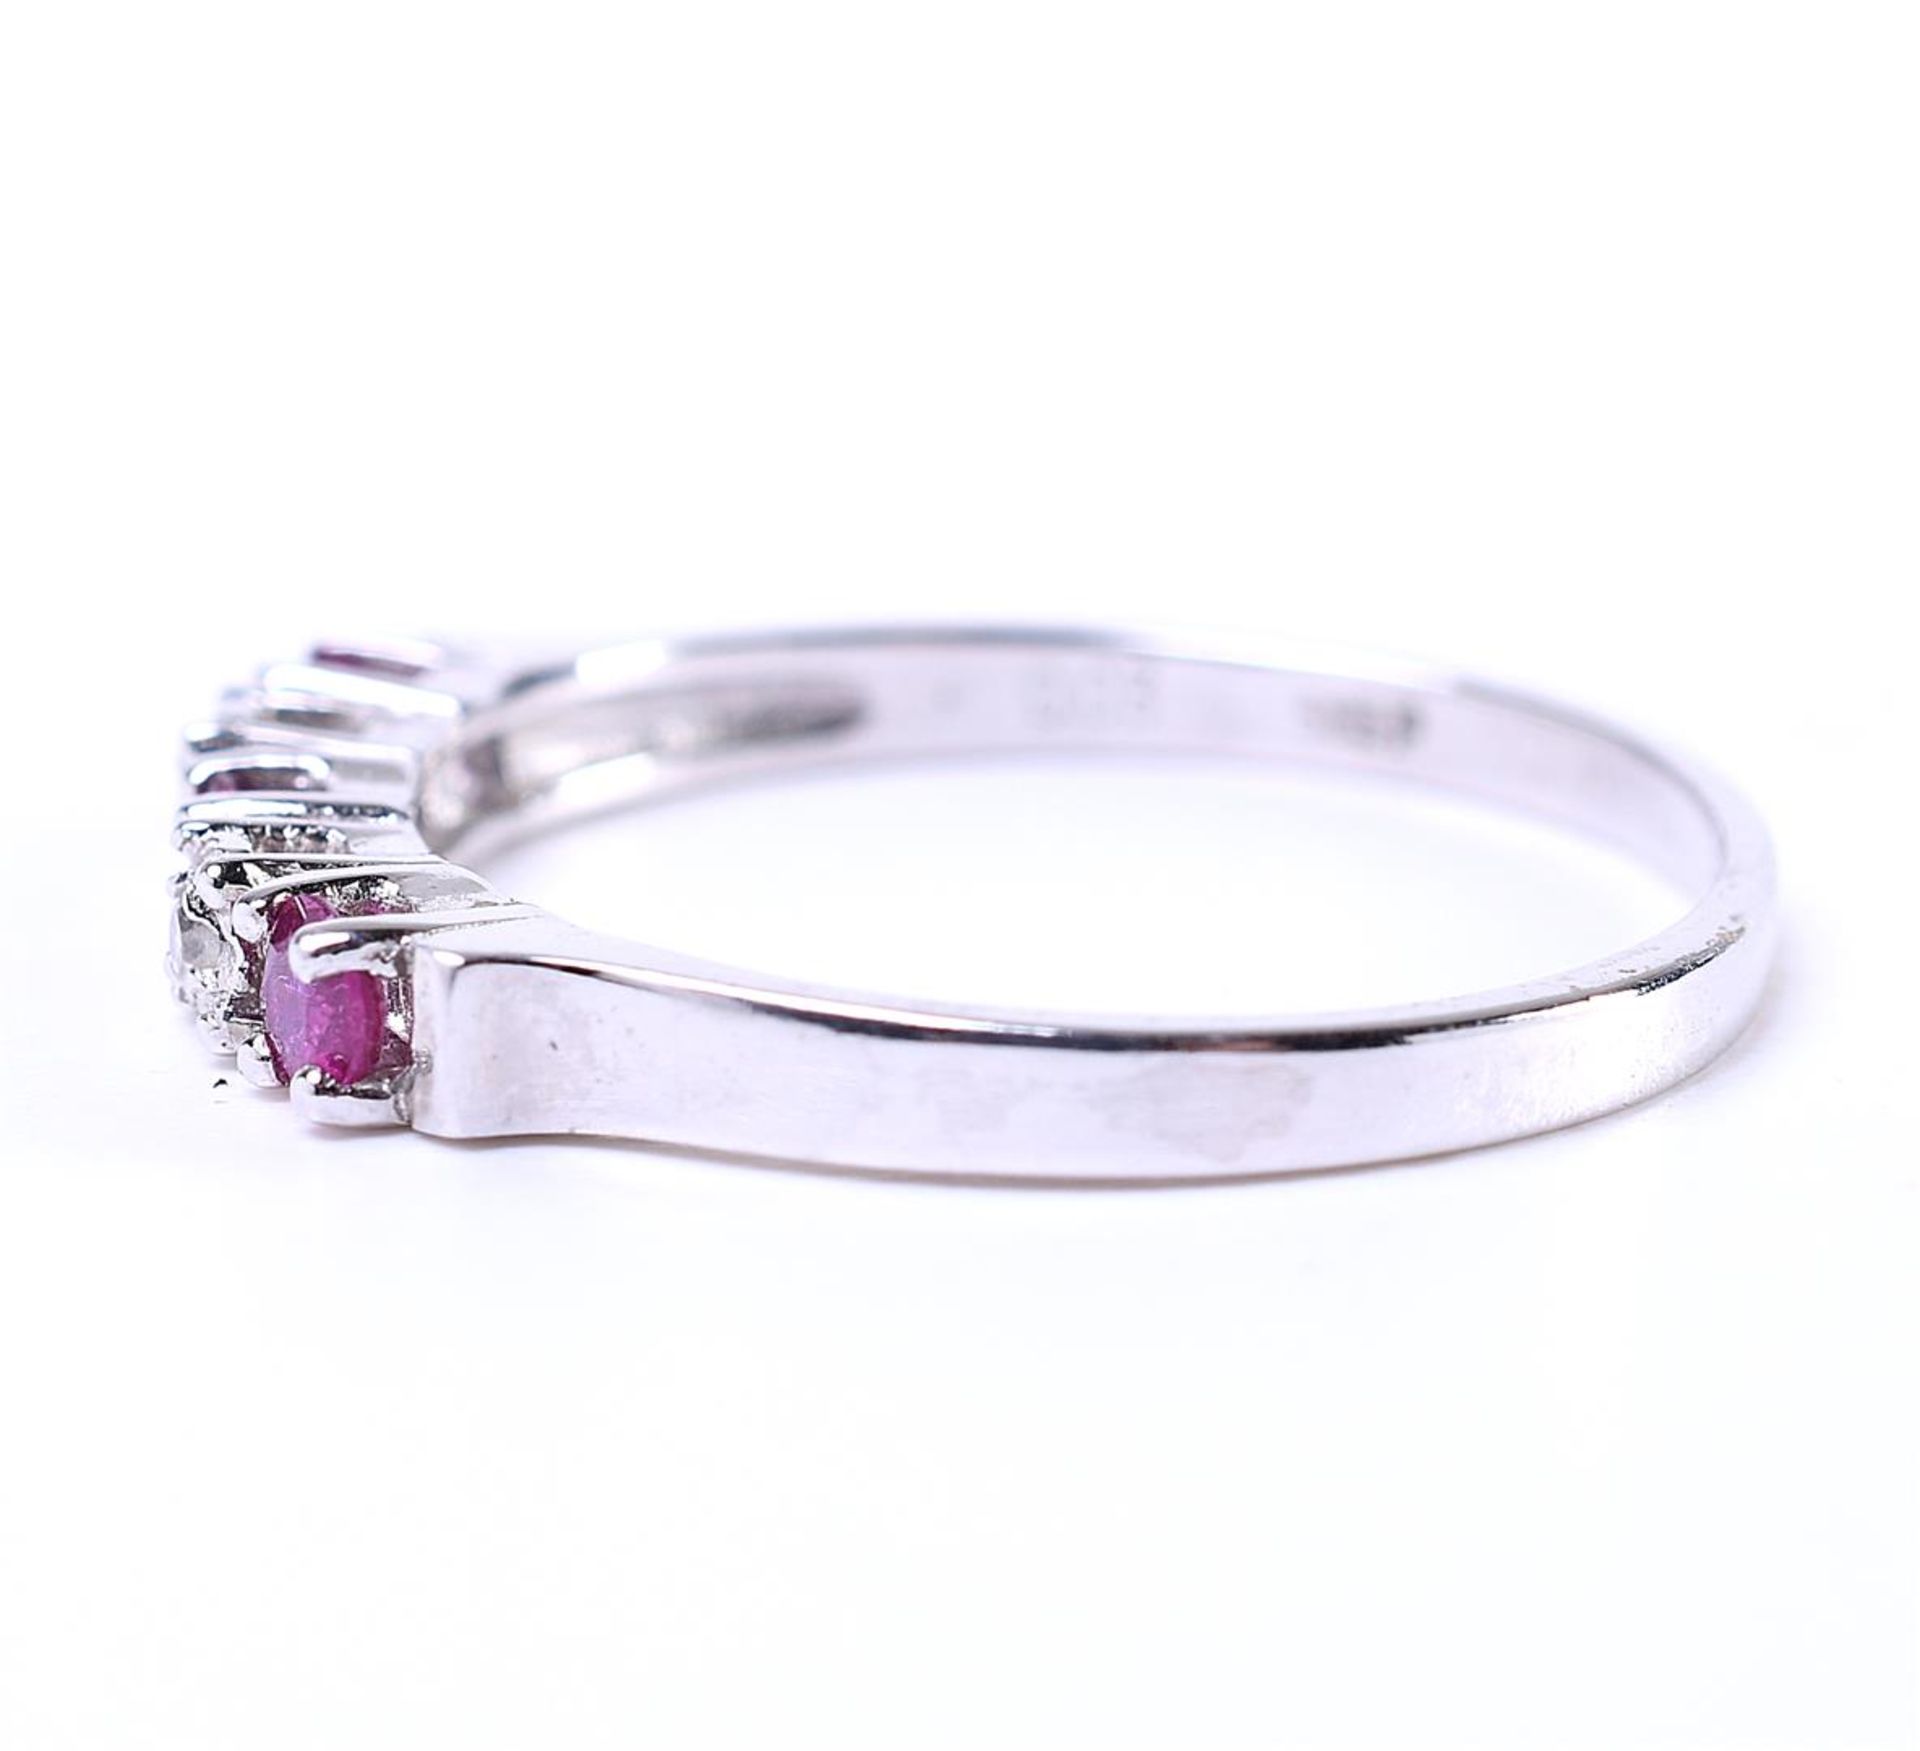 14kt white gold row ring set with ruby and diamond. Of which 2 single cut diamonds - Image 2 of 6